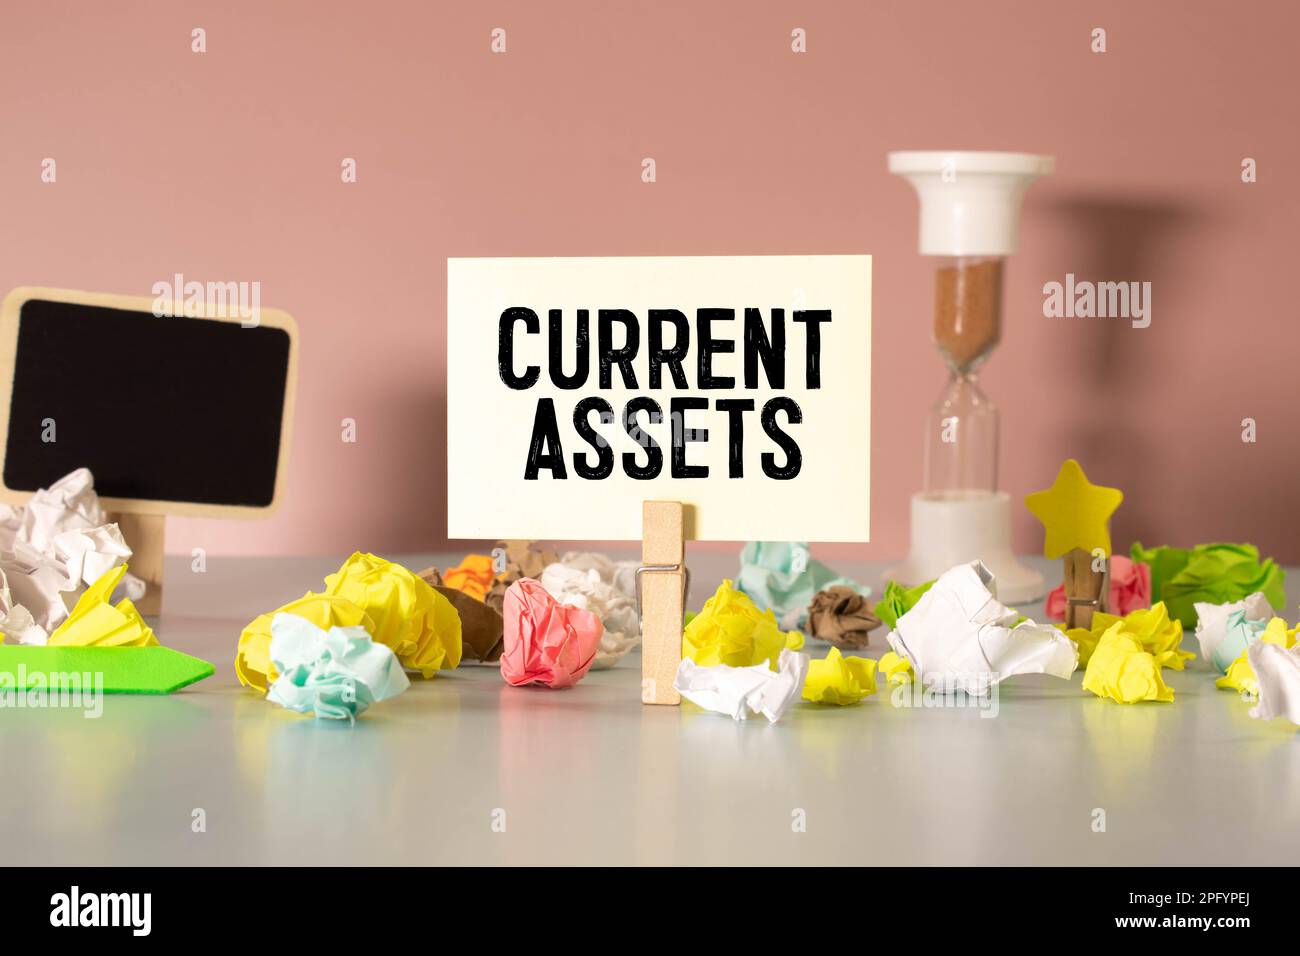 Current assets - assets of a company that are expected to be sold or used as a result of business operations over the next year, text concept on notep Stock Photo